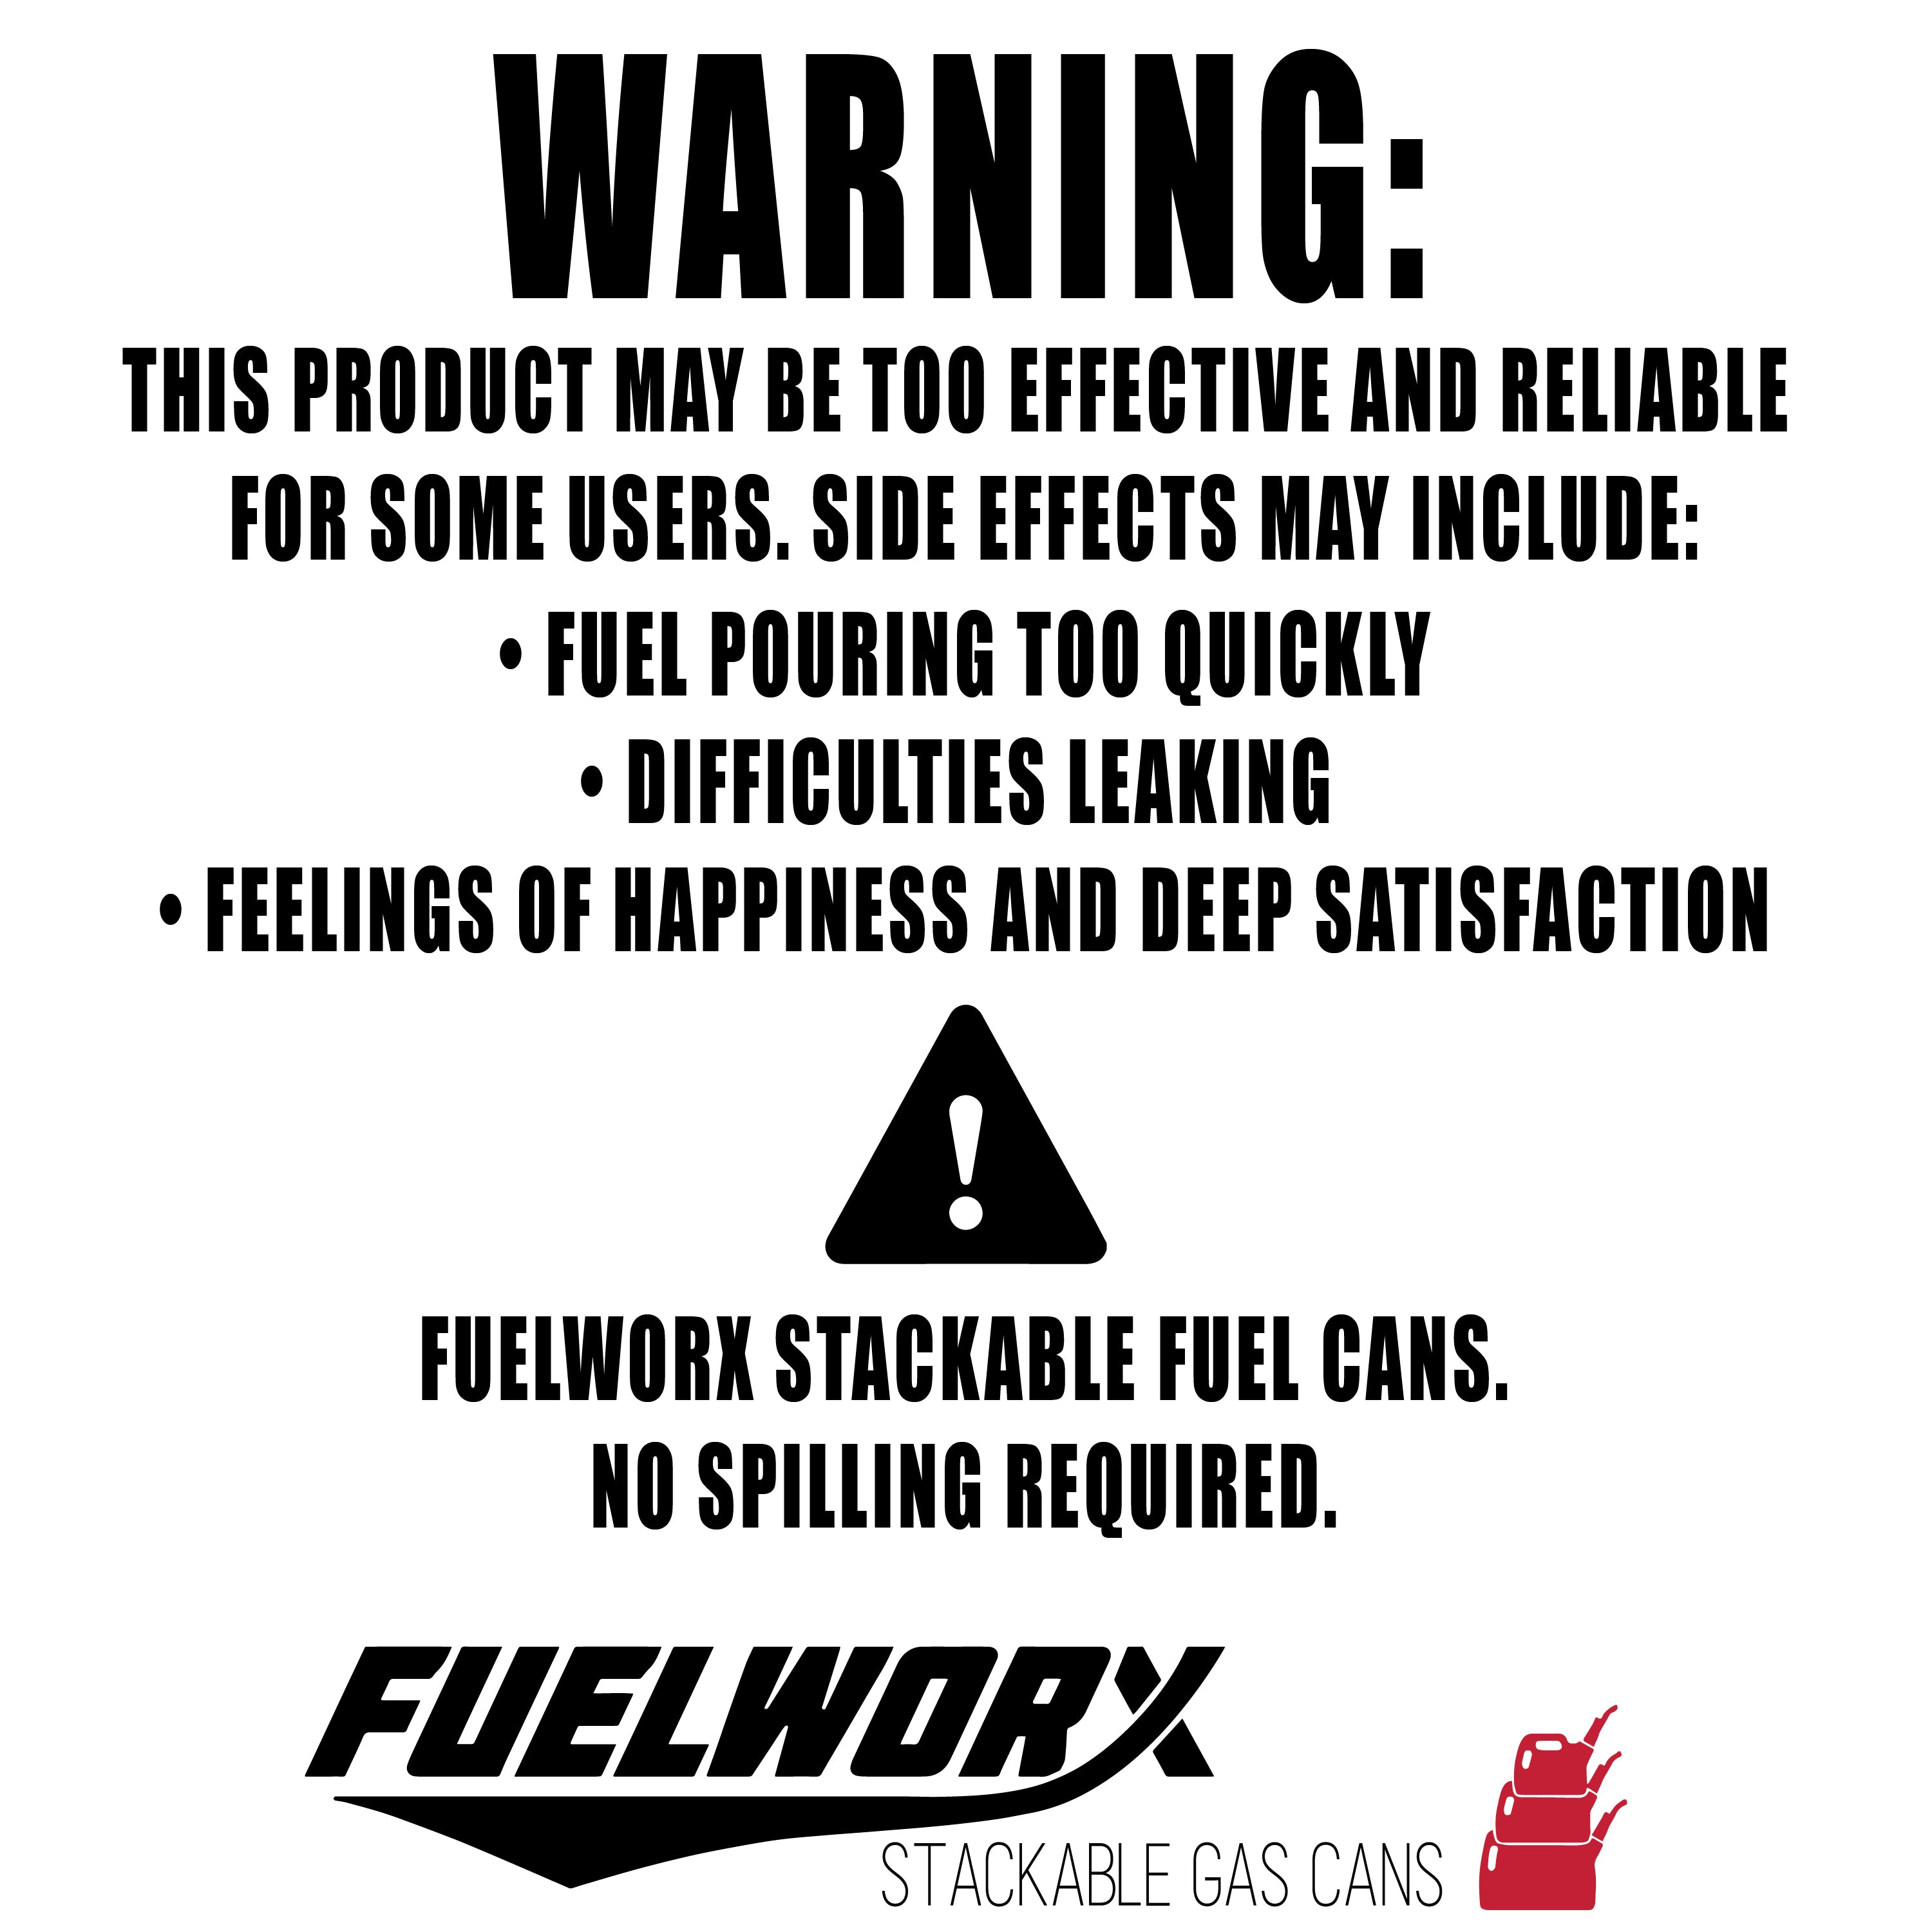 Fuelworx-Red-5-Gallon-Stackable-Fast-Pour-Gas-Fuel-Can-CARB-Compliant-Made-in-The-USA-5-Gallon-Gas-Can-2-Pack-image-7